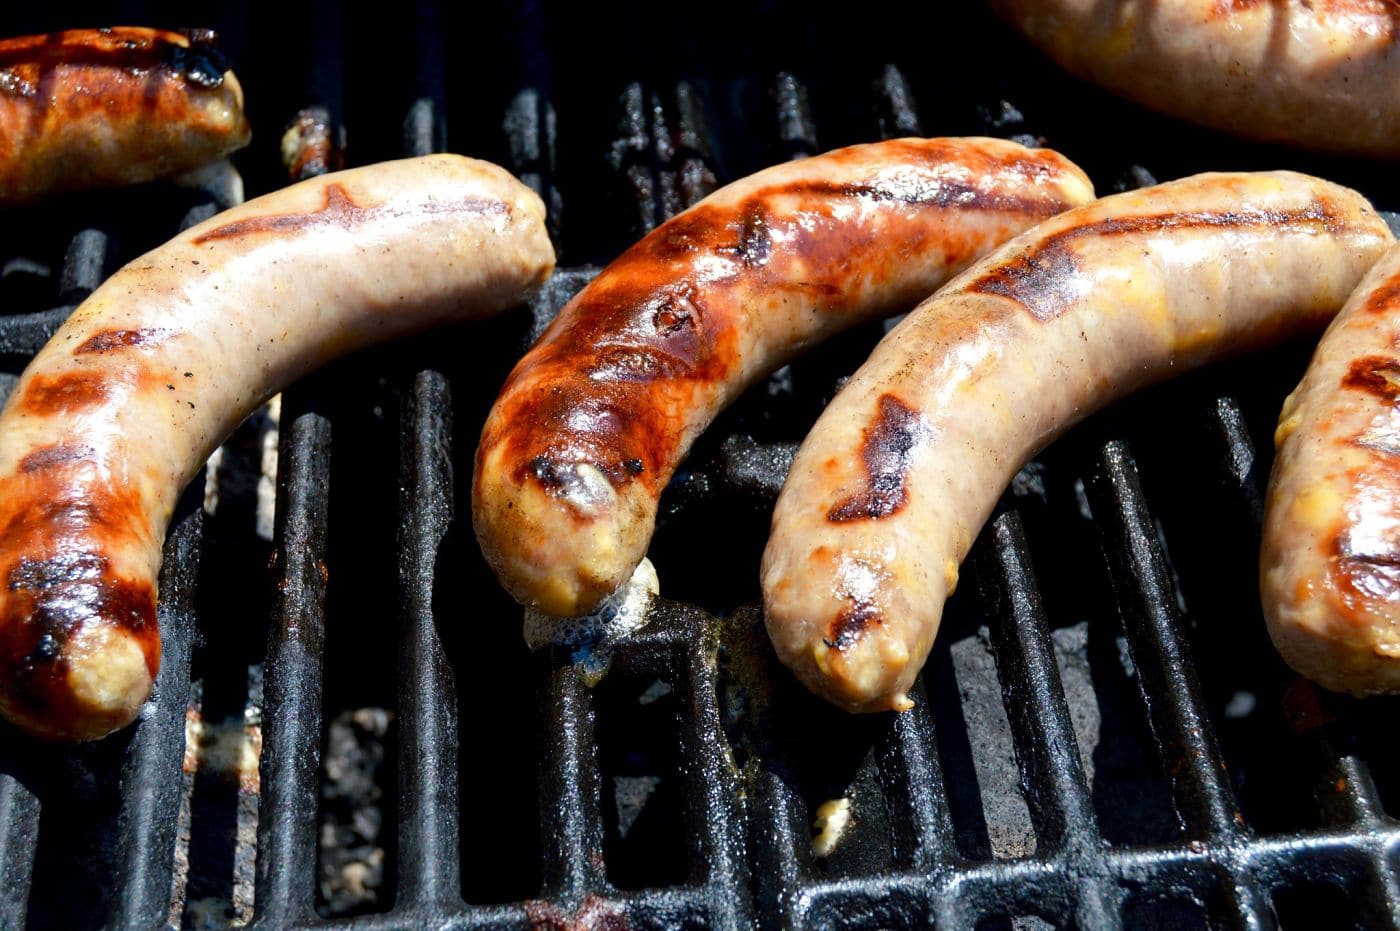 brats on the grill